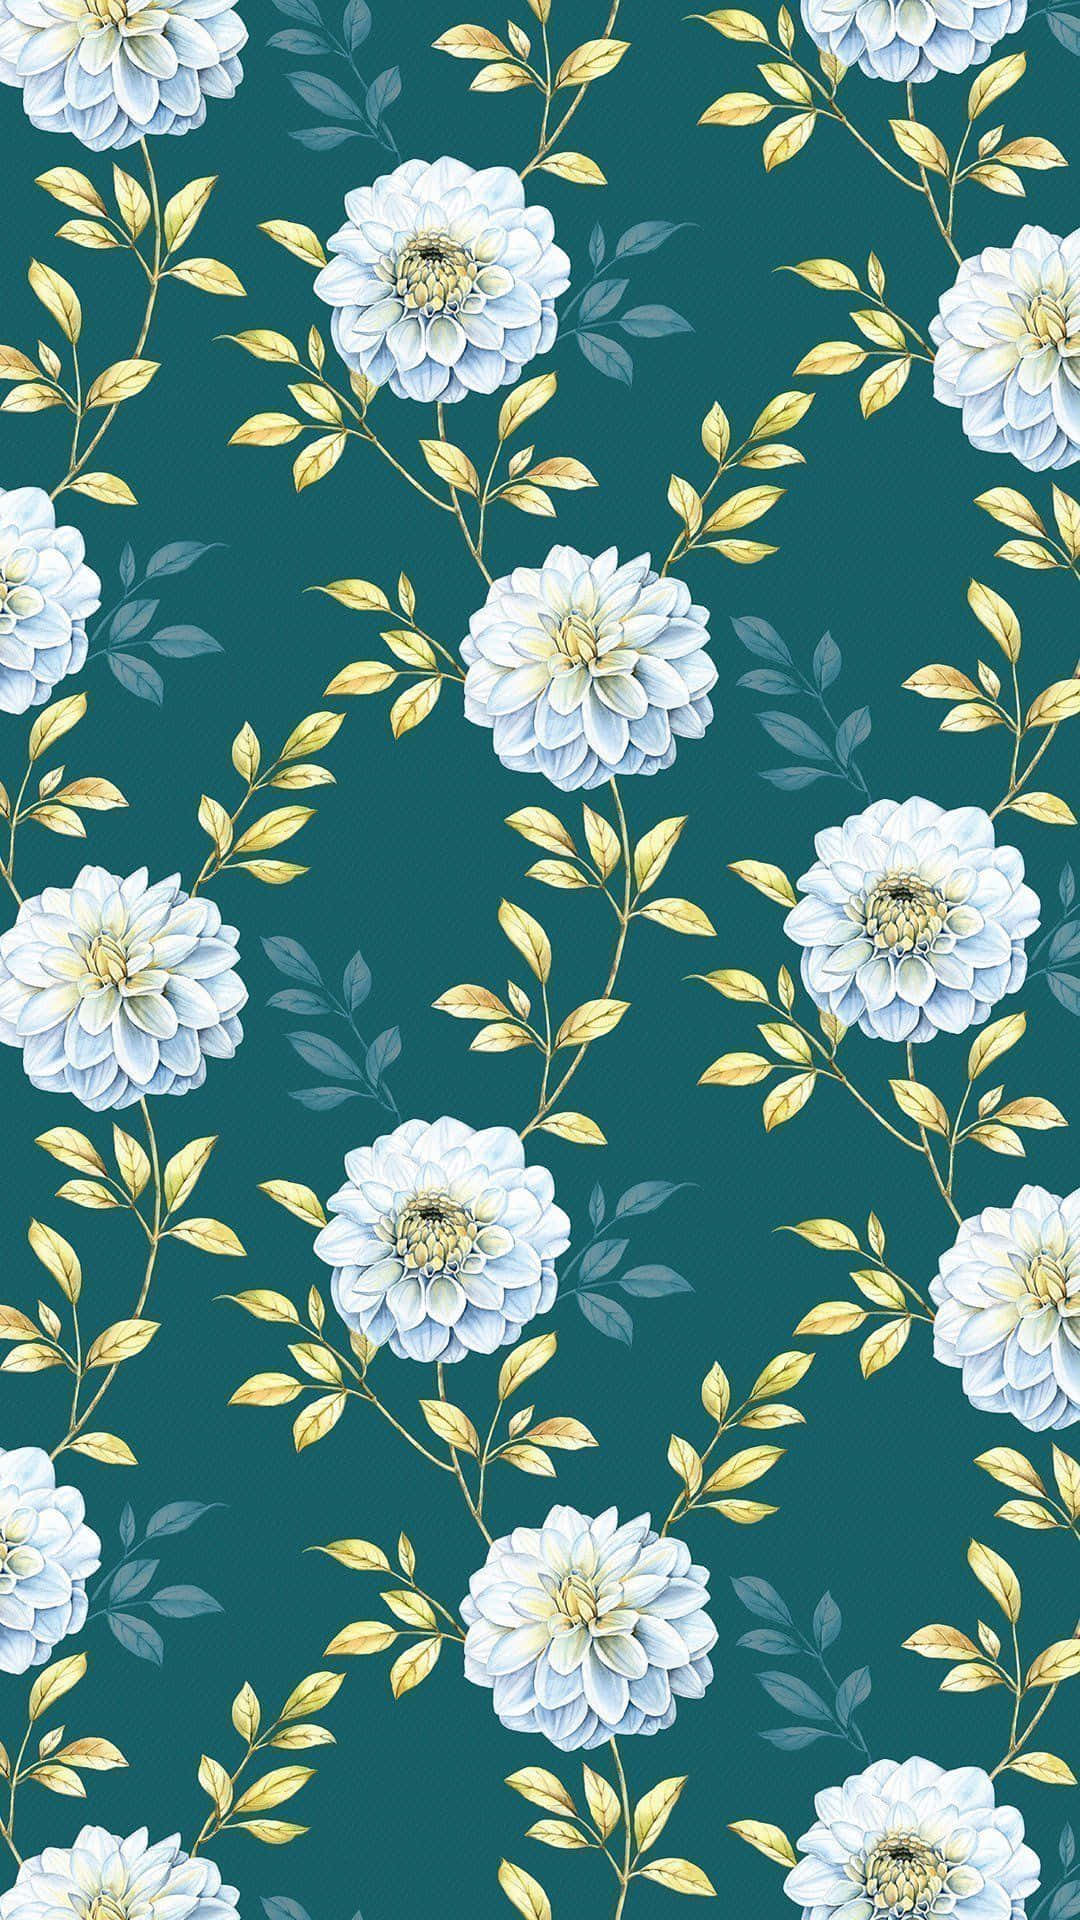 A Floral Pattern With White Flowers On A Teal Background Wallpaper